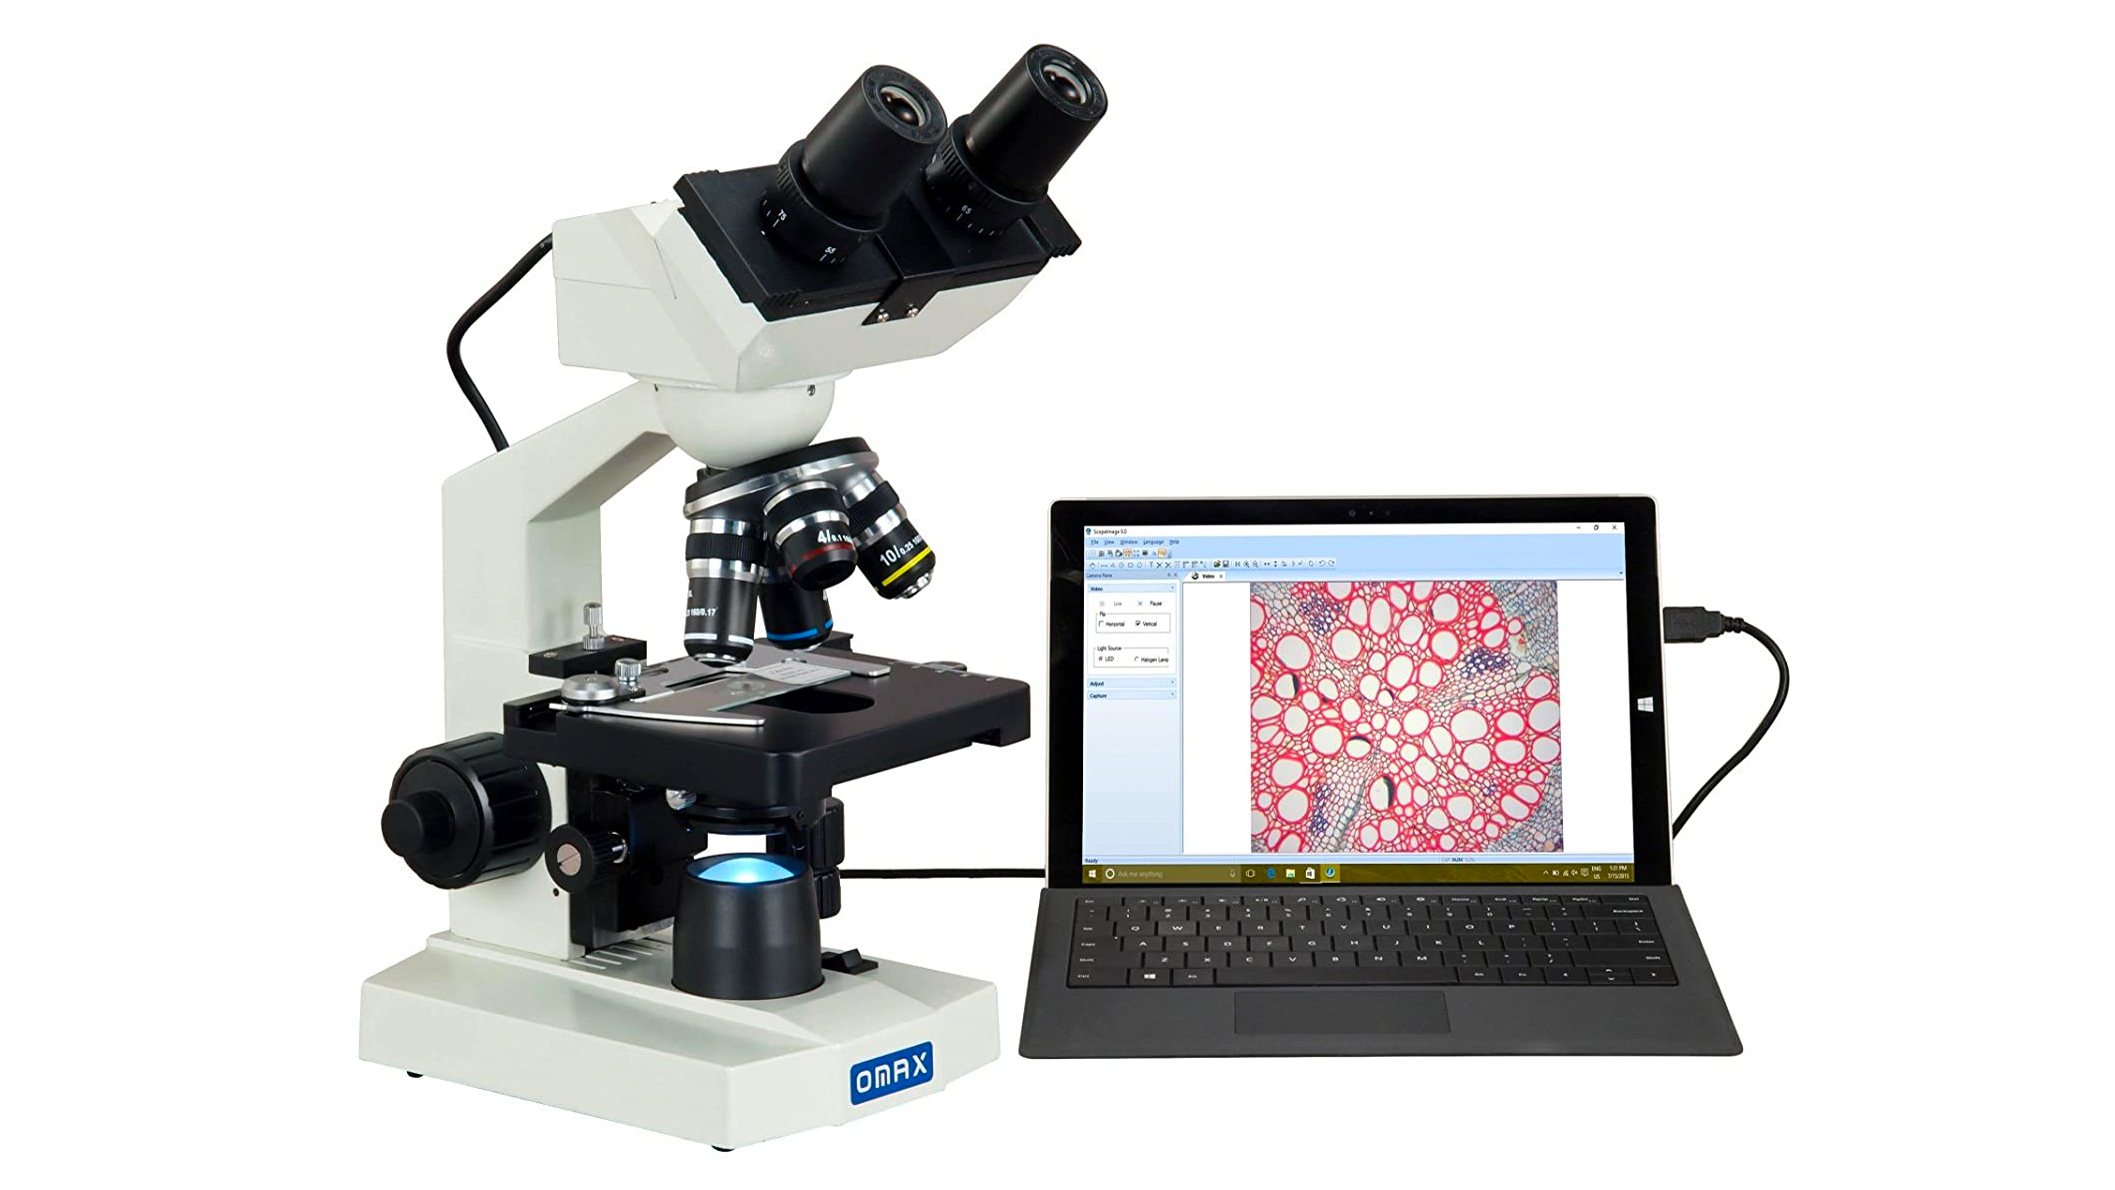 AmScope microscope for kids - a microscope with amazing magnification